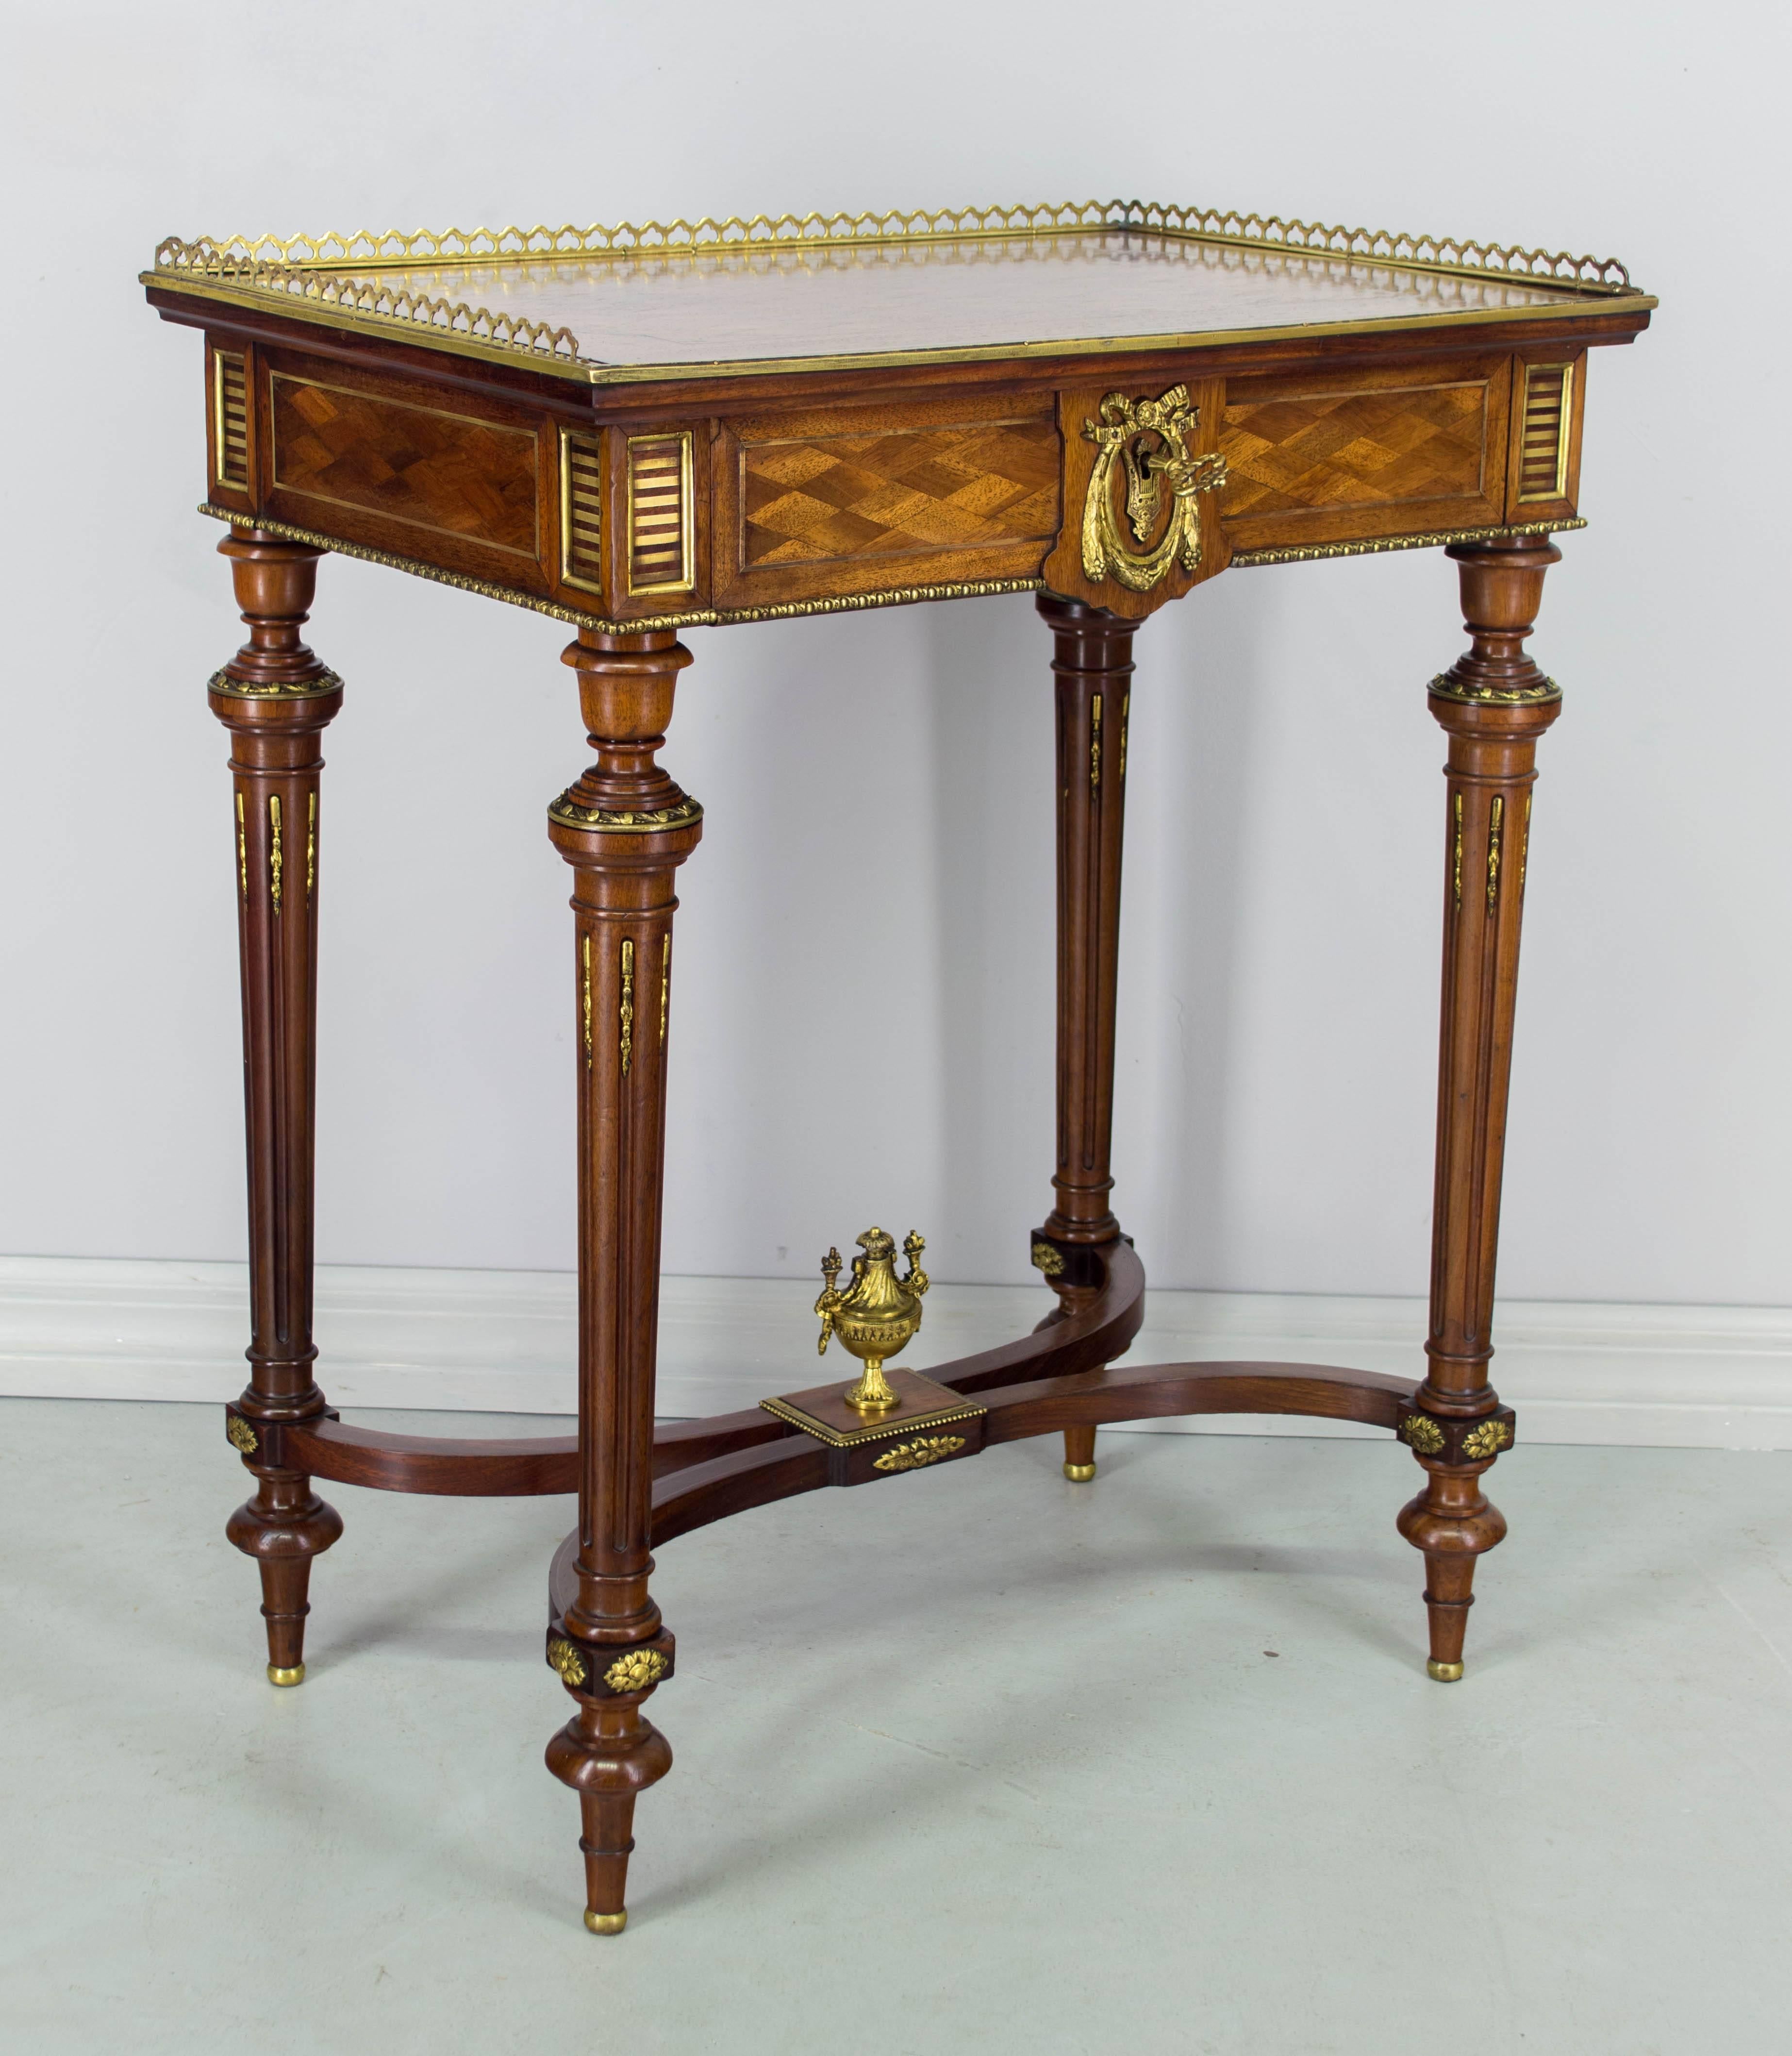 A superb Napoleon III bronze-mounted travailleuse, or "work table" with hinged top. Solid mahogany with parquetry mahogany veneer top and sides and inlaid bronze details. Bronze gallery and delicate decoration. Top opens to reveal a